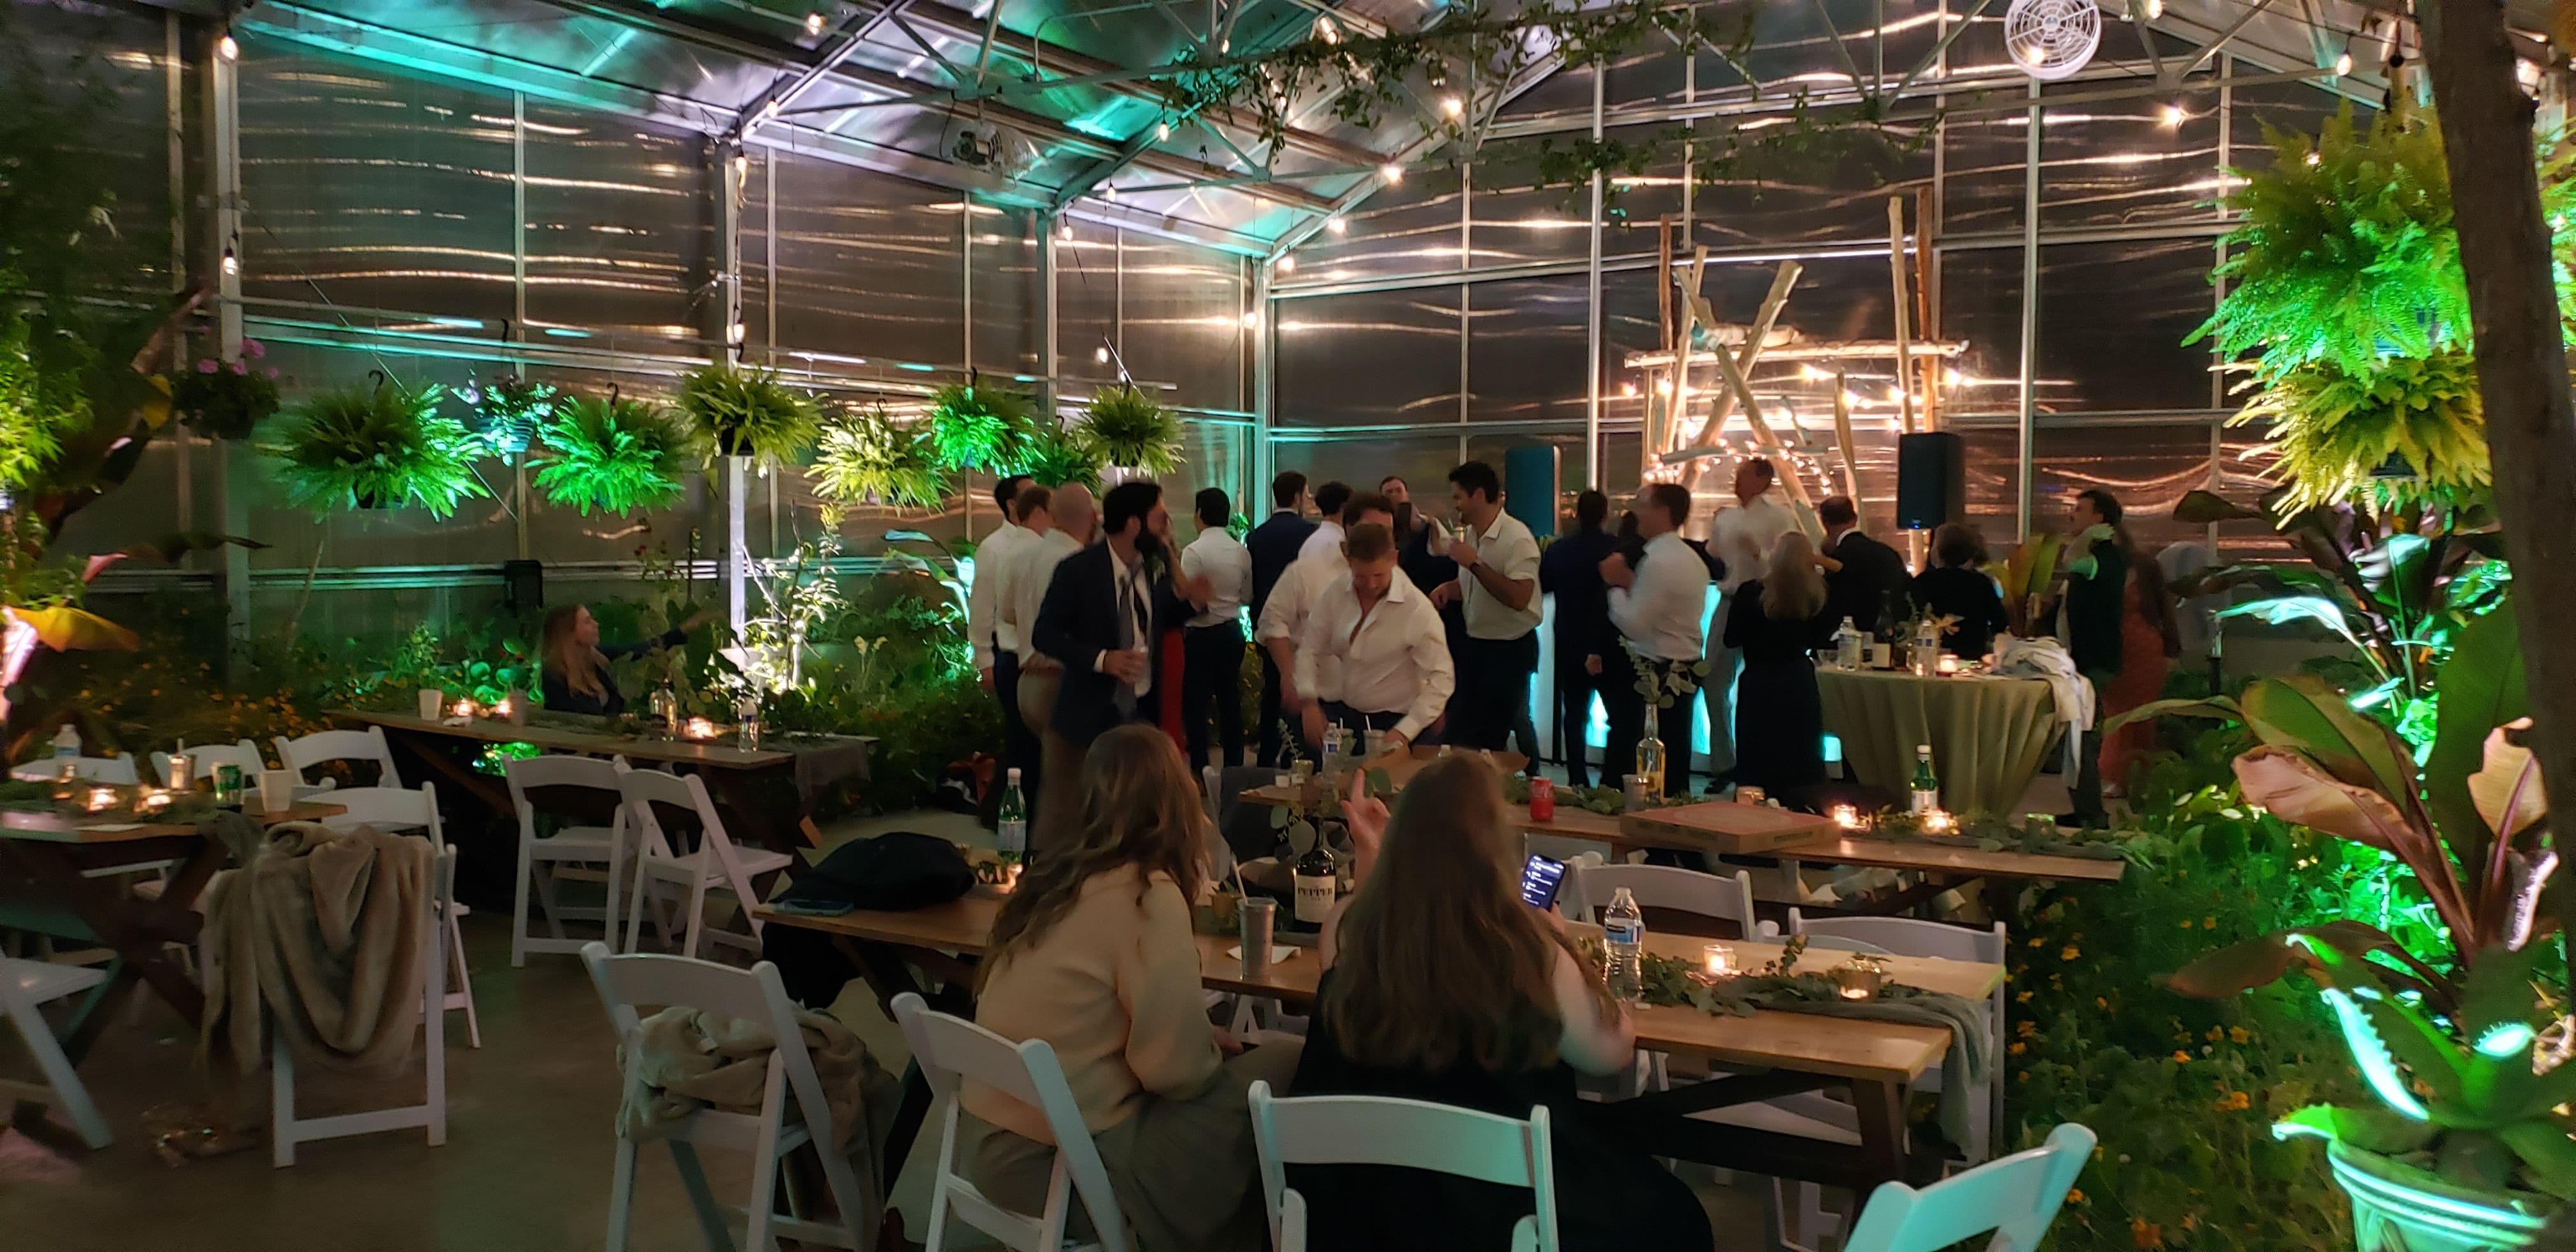 Wedding lighting with Mint green and soft white up lighting inside the greenhouse of Sitio Events